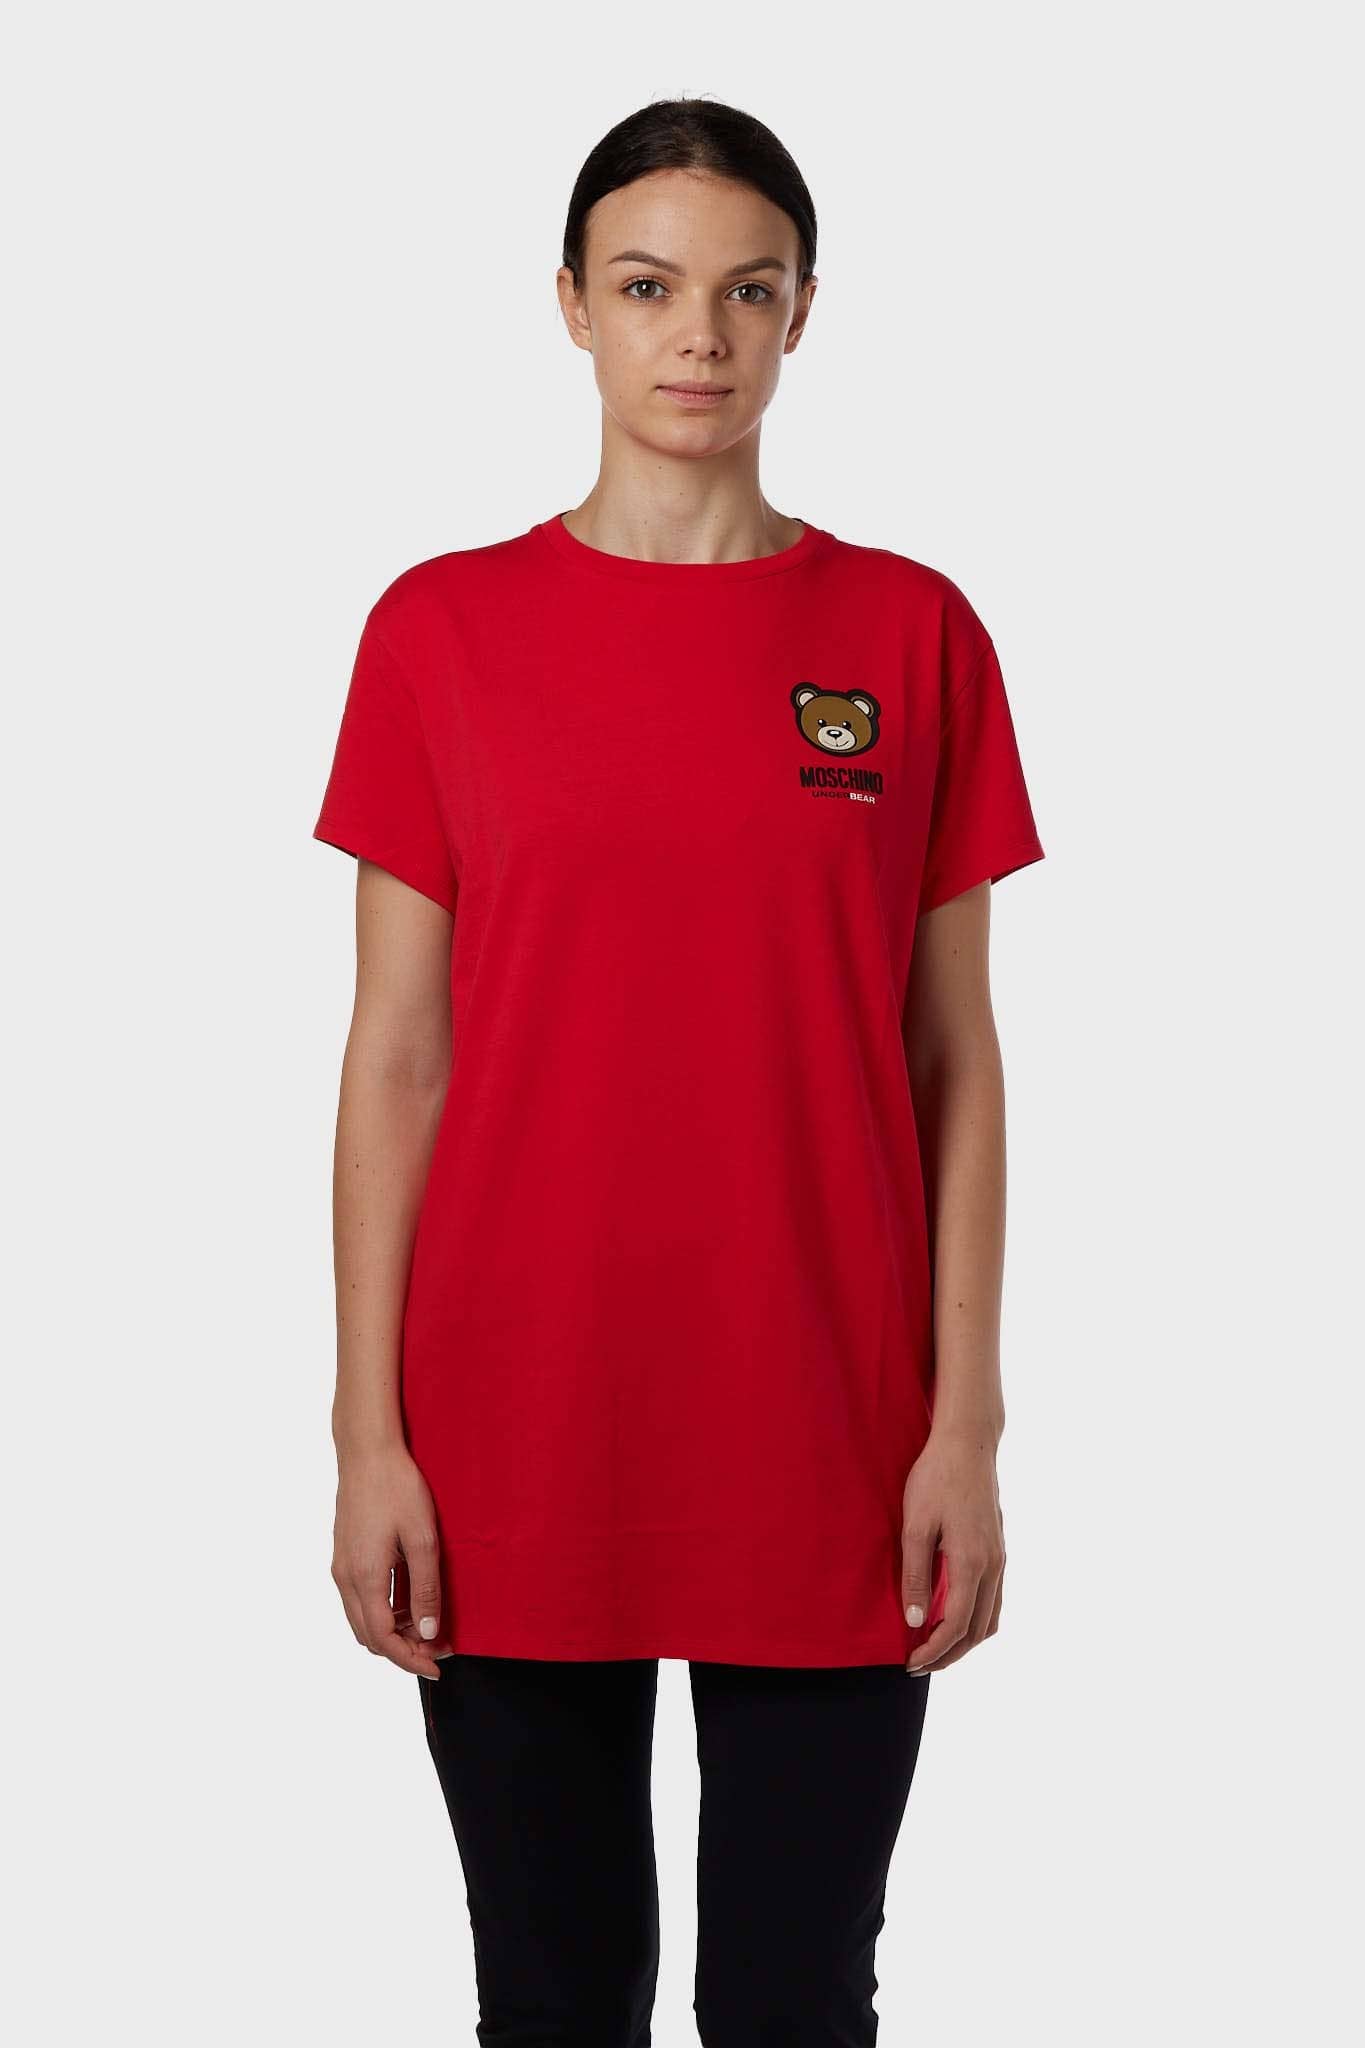 MOSCHINO T-SHIRT A0790 4410 116 ROSSO DONNA